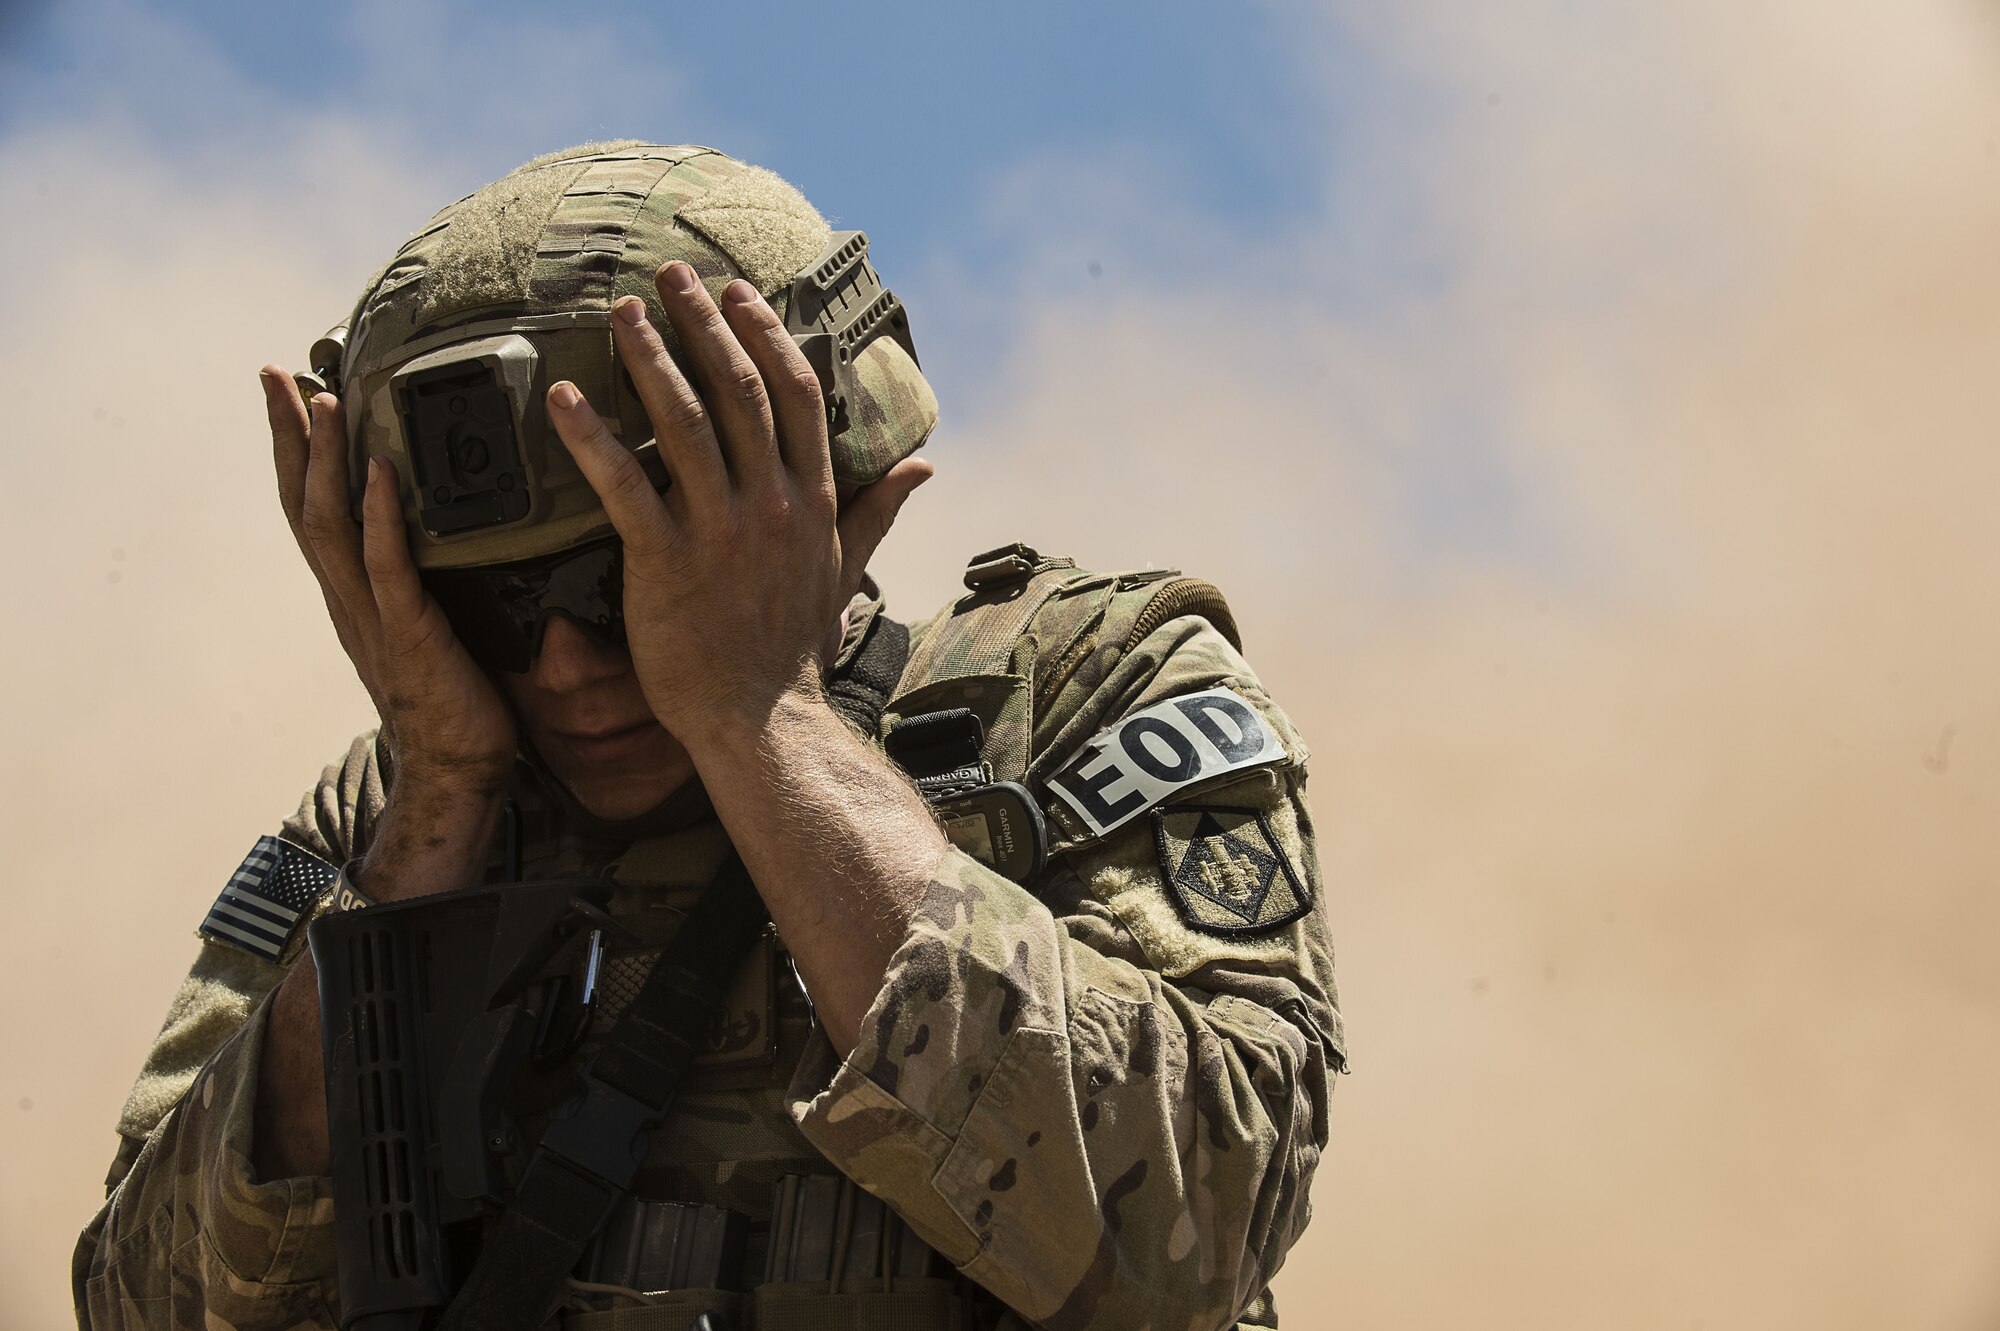 Airman 1st Class Jared Ball, EOD team member, shields his face from oncoming sand during fly-away training at the Florence Military Reservation in Florence, Ariz., July 21, 2017. The wind gusts caused from the Black Hawks take-off and landing kick up sand from the desert floor causing low visibility. To reduce the uncertainty in different scenarios, the 56th Civil Engineer Squadron EOD team conducts fly-away training in an ongoing attempt to enhance skills needed in a deployed environment. (U.S. Air Force photo/Airman 1st Class Alexander Cook)